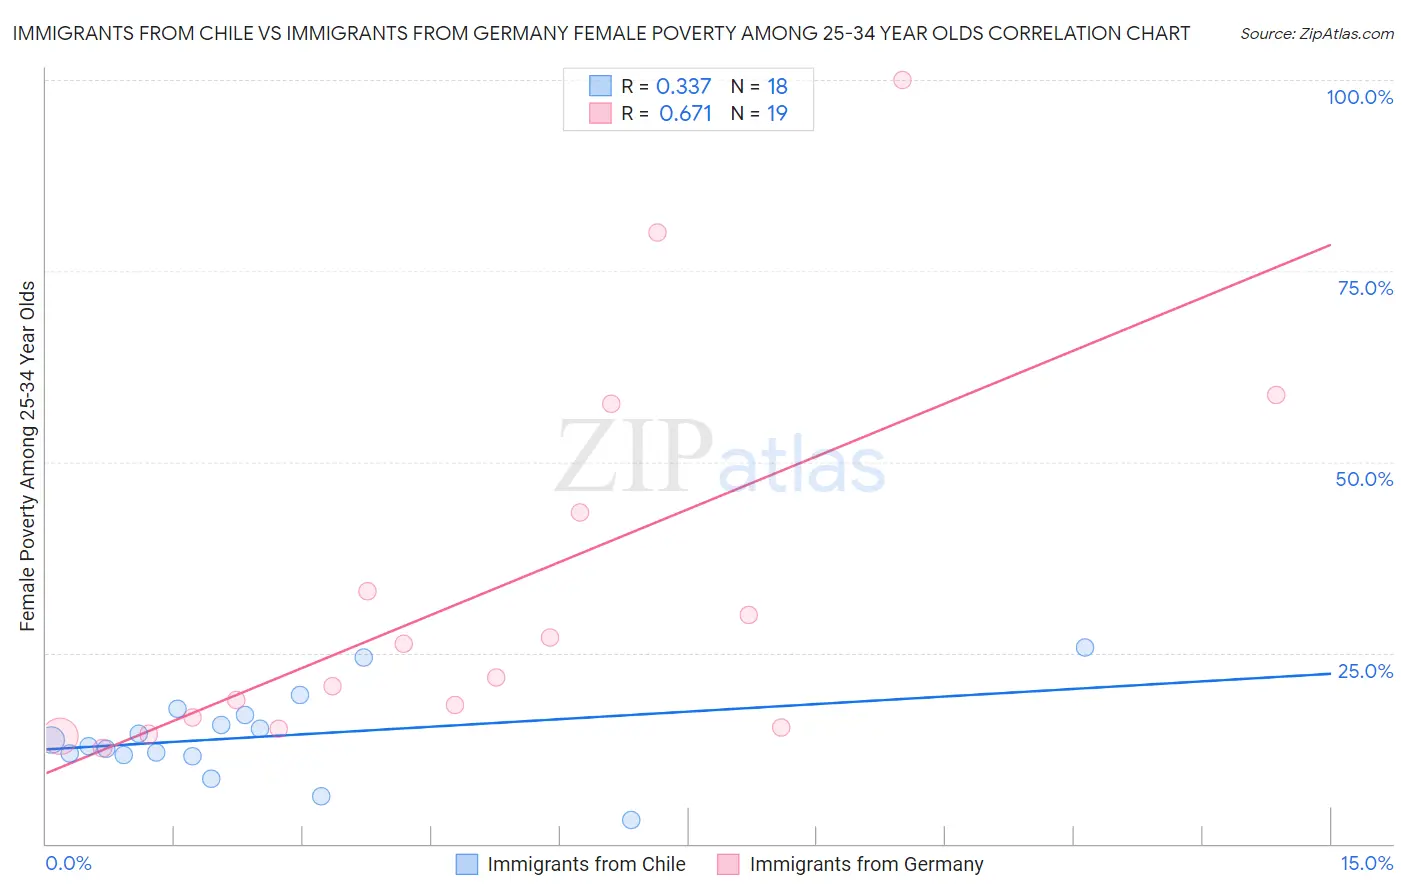 Immigrants from Chile vs Immigrants from Germany Female Poverty Among 25-34 Year Olds